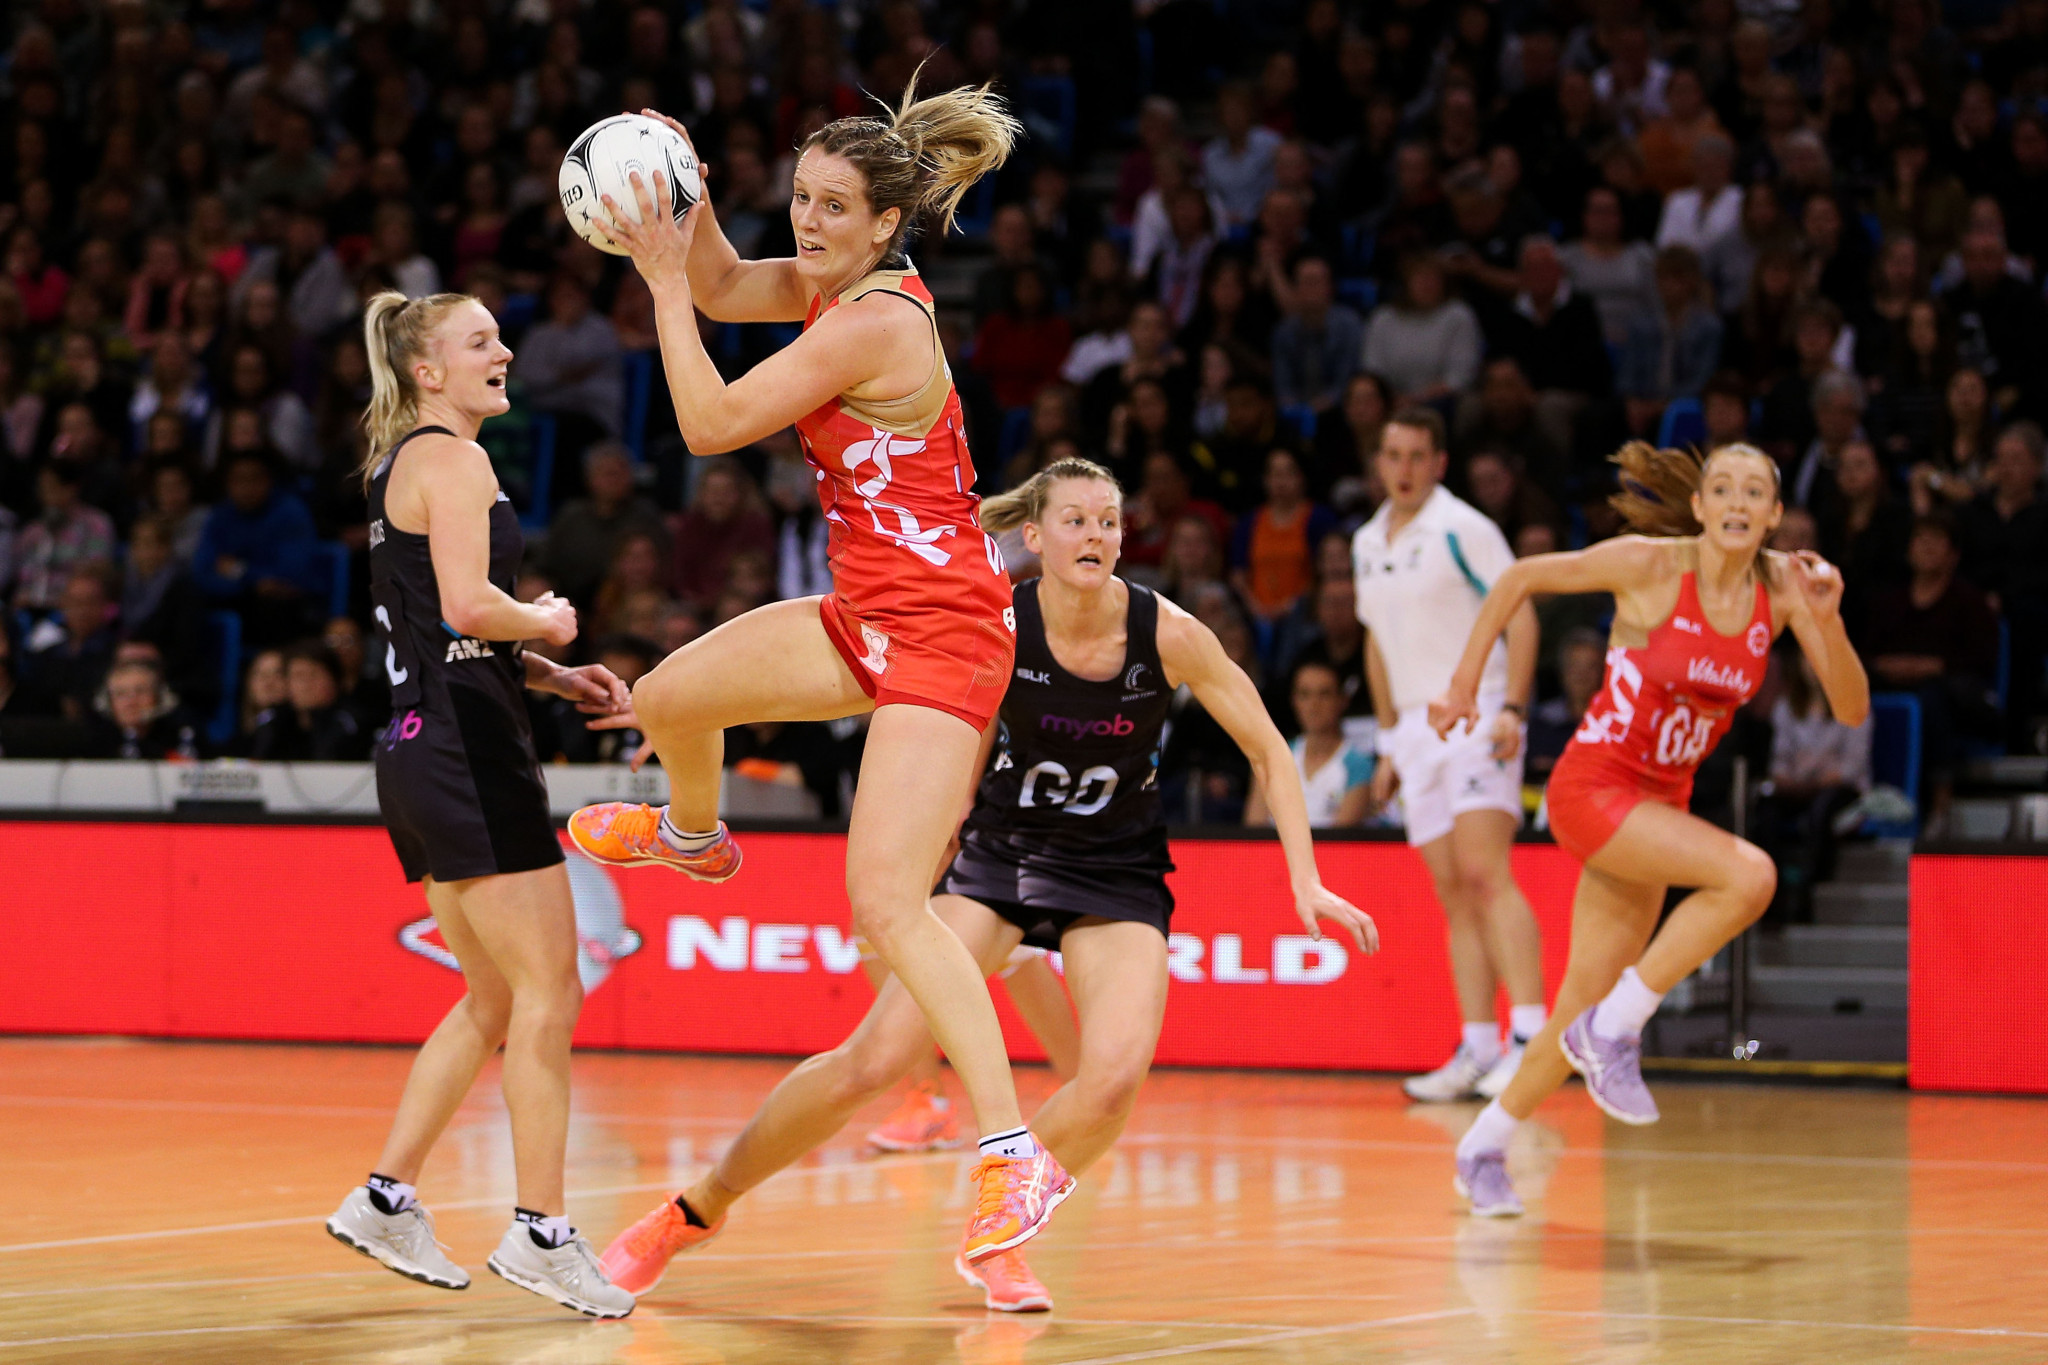 England's Commonwealth Games gold a "pivotal" moment for netball, former international says